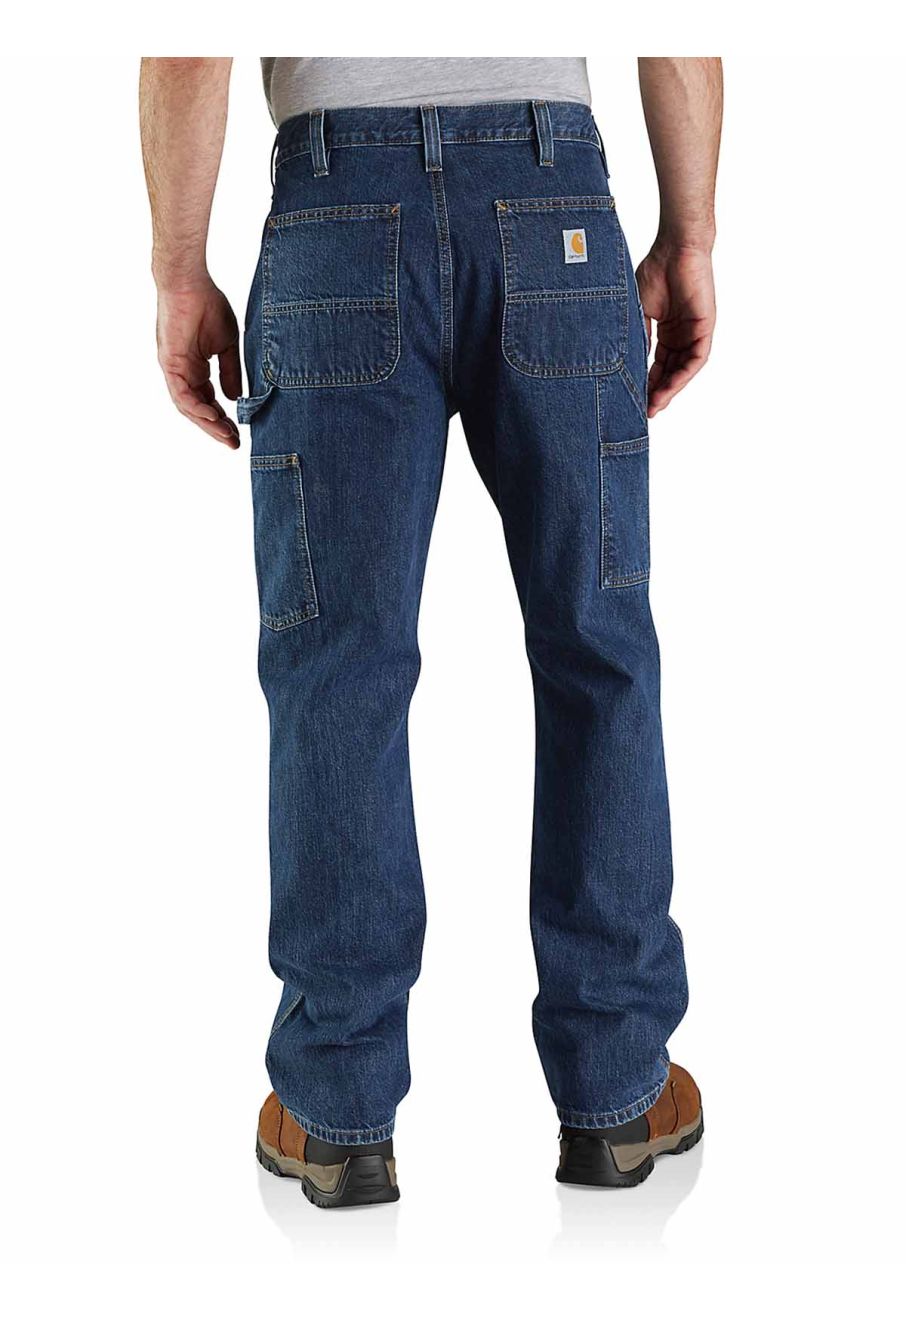 H45 Carhartt Work Front 104944 Canal Jeans Double Utility